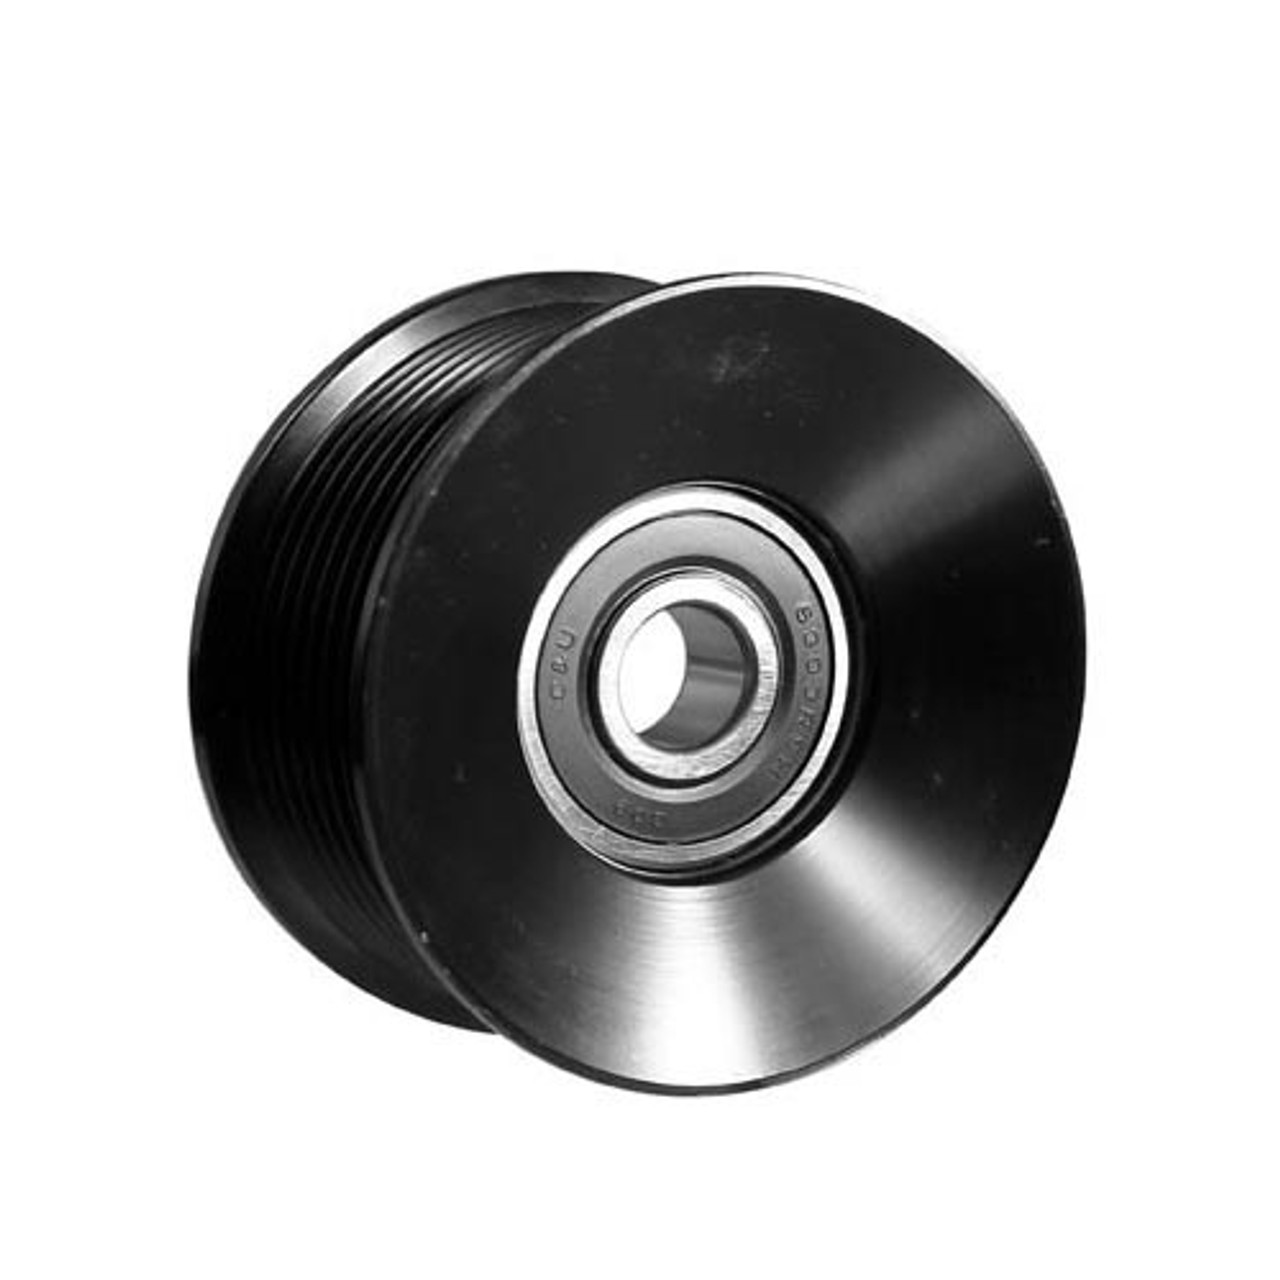 Dayco 6.0L Powerstroke Grooved Pulley